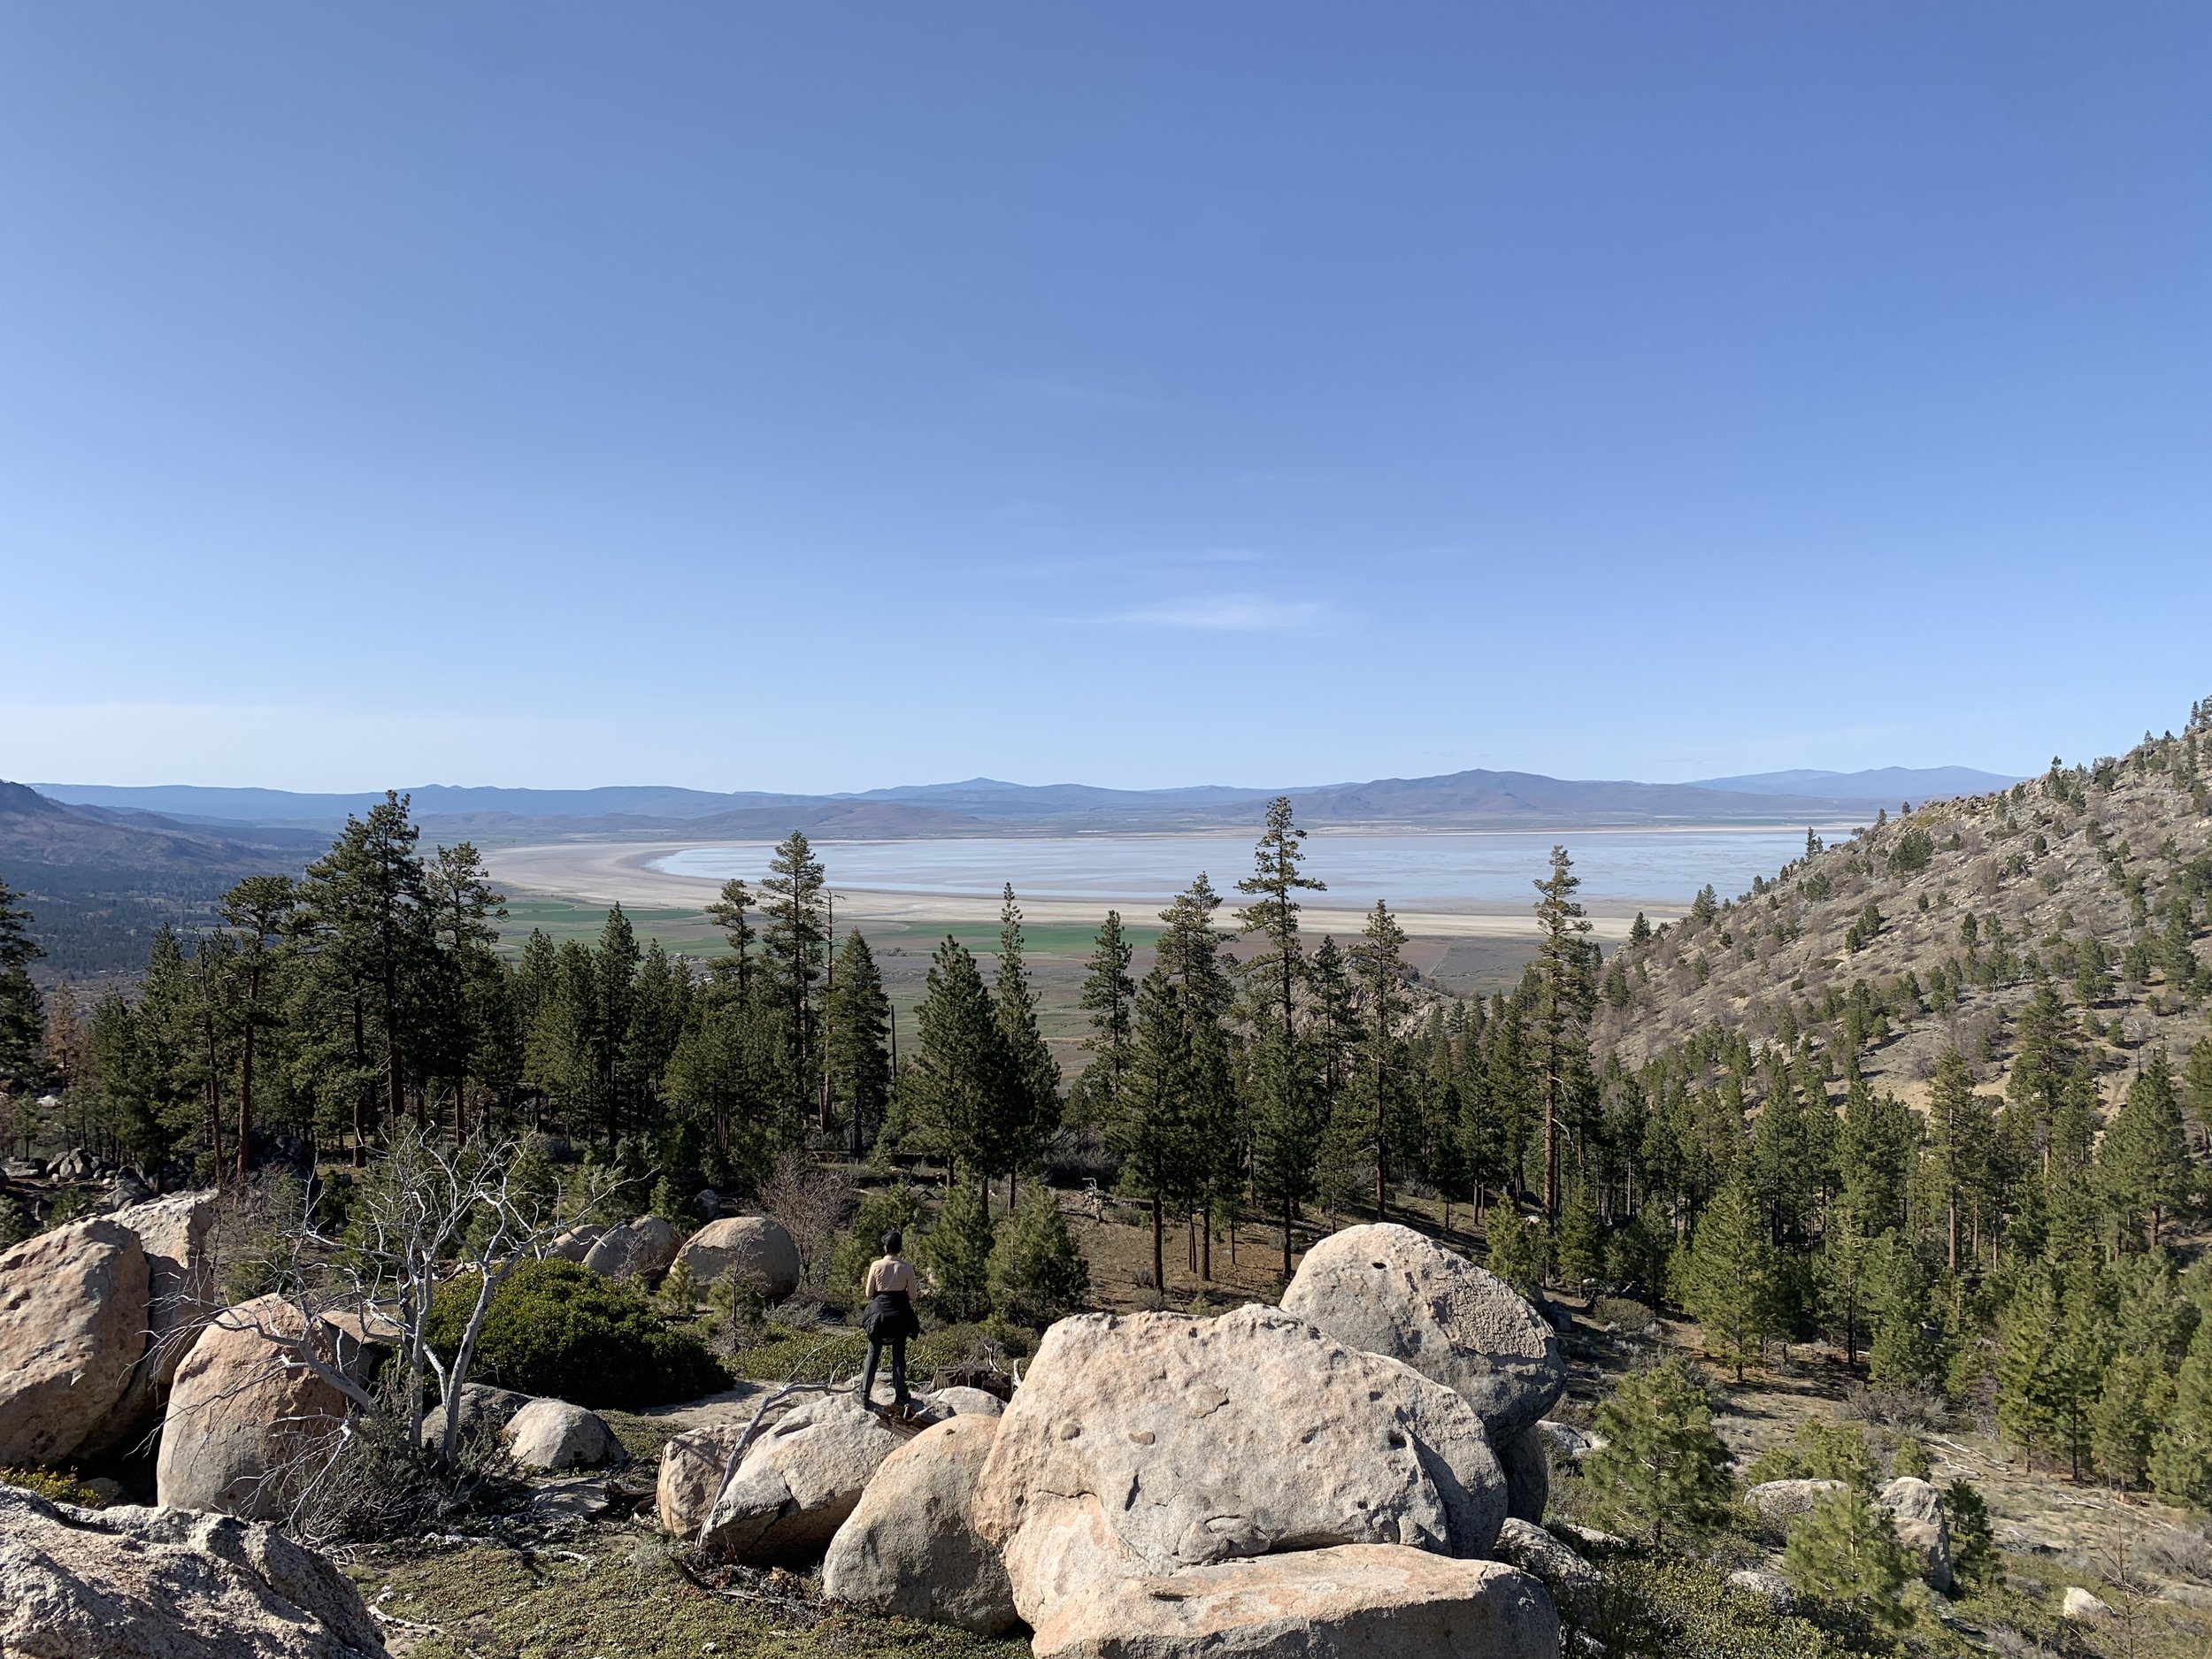  We also visited parts of the Plumas National Forest, adjacent to the Highway 395 study area, to see some of the higher elevation habitats used by migrating deer herds. 